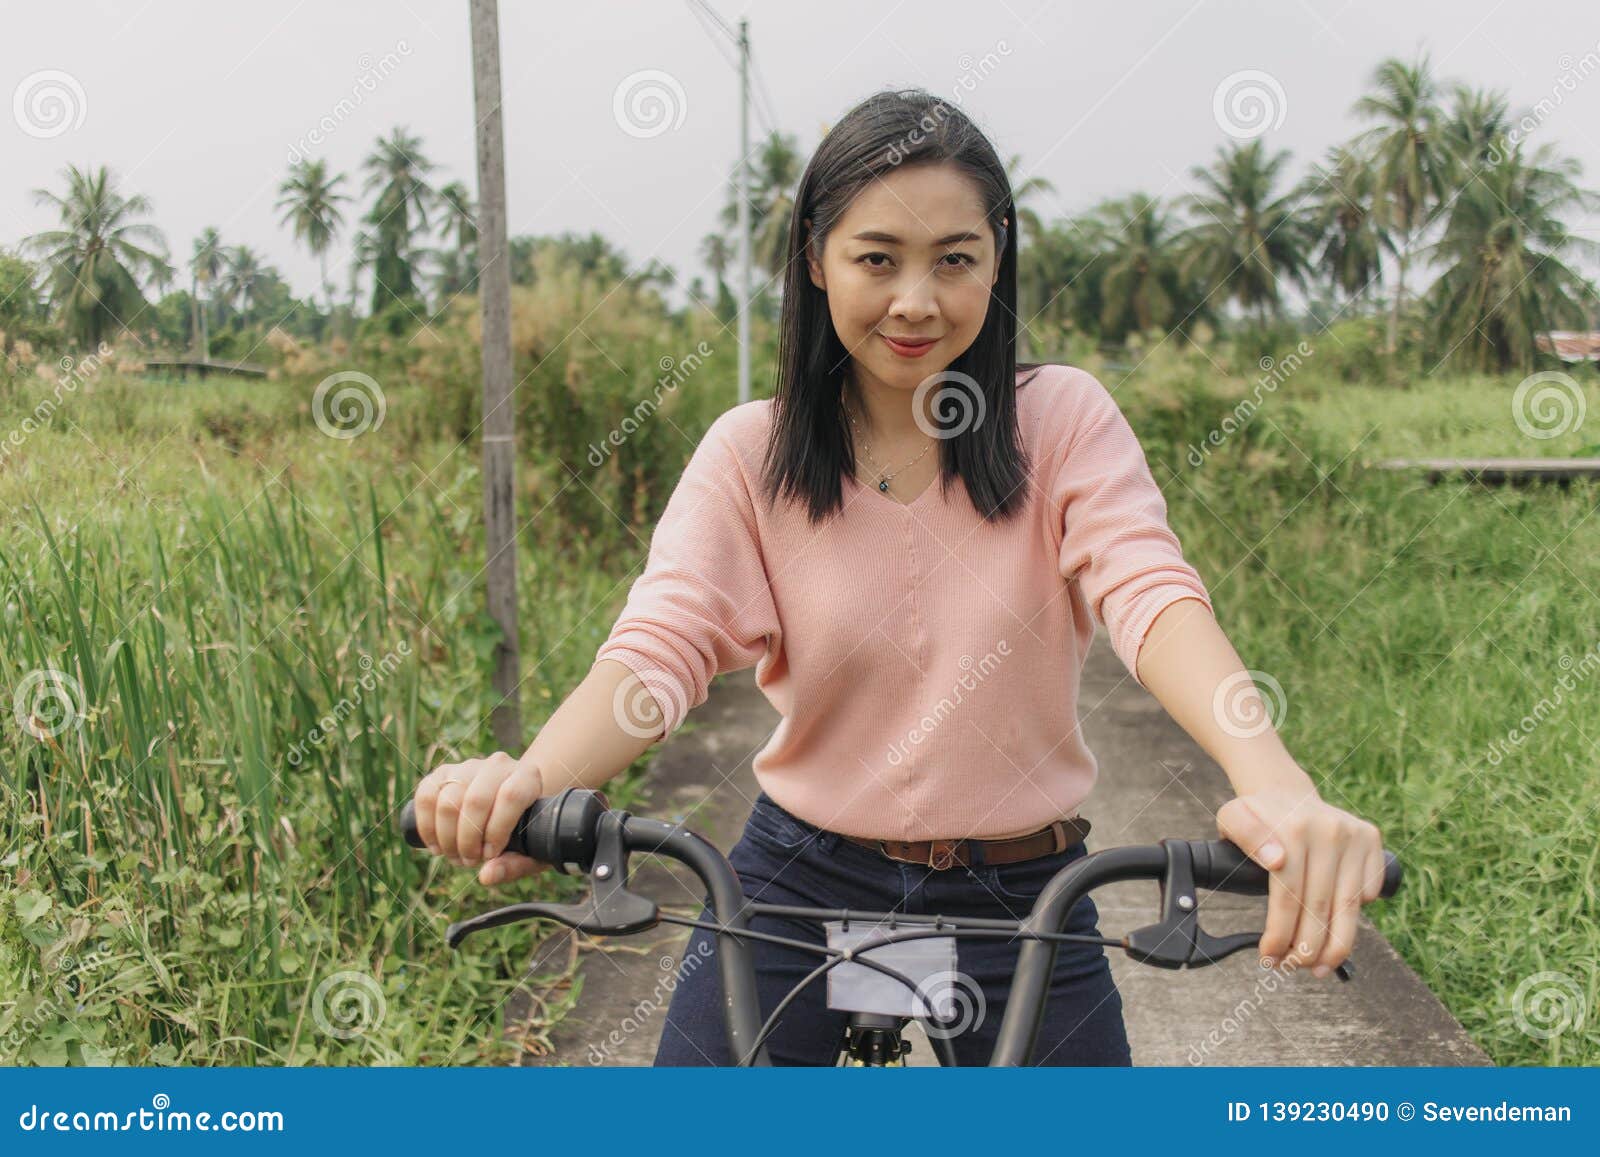 Asian Woman Ride Bicycle On The Local Street With Greenery View Stock